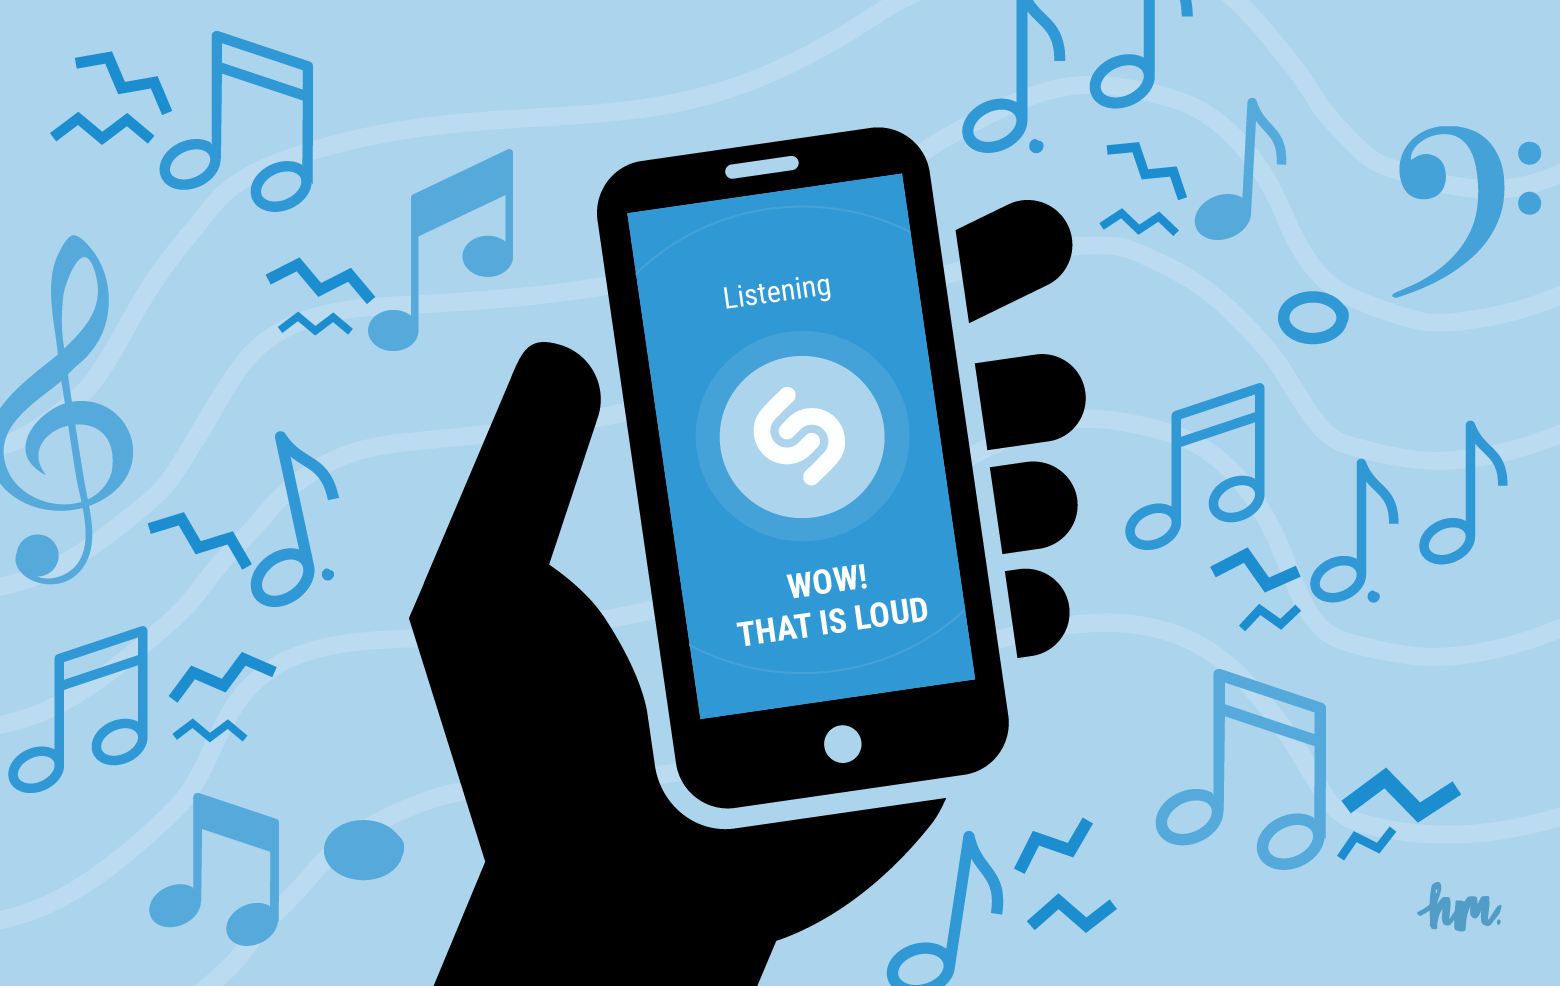 Illustration of hand surrounding by loud musical notes, holding phone with Shazam app. The app states, "Wow! That is loud."